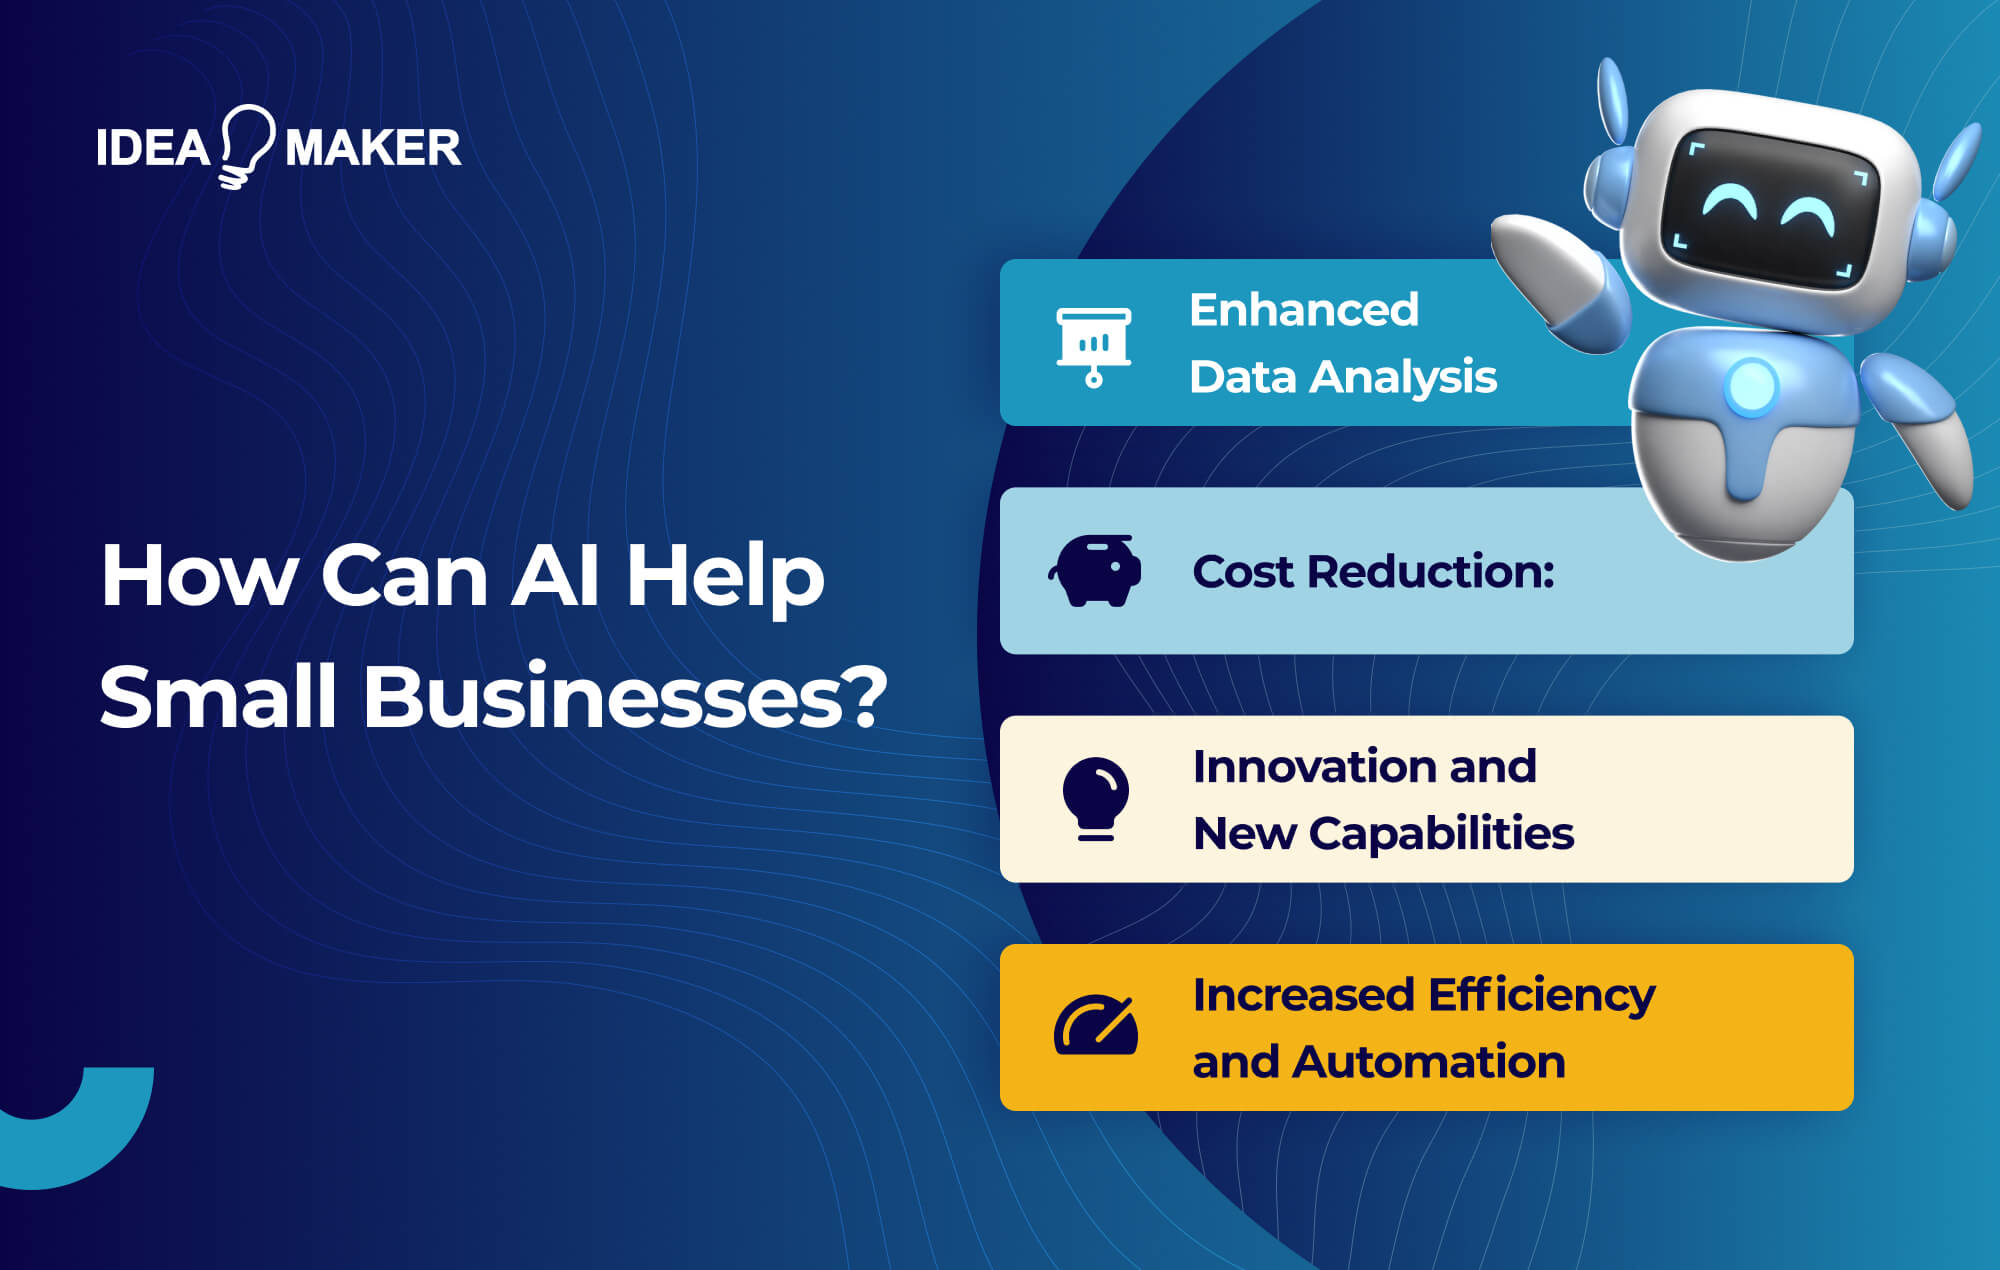 How AI Can Help Small Businesses